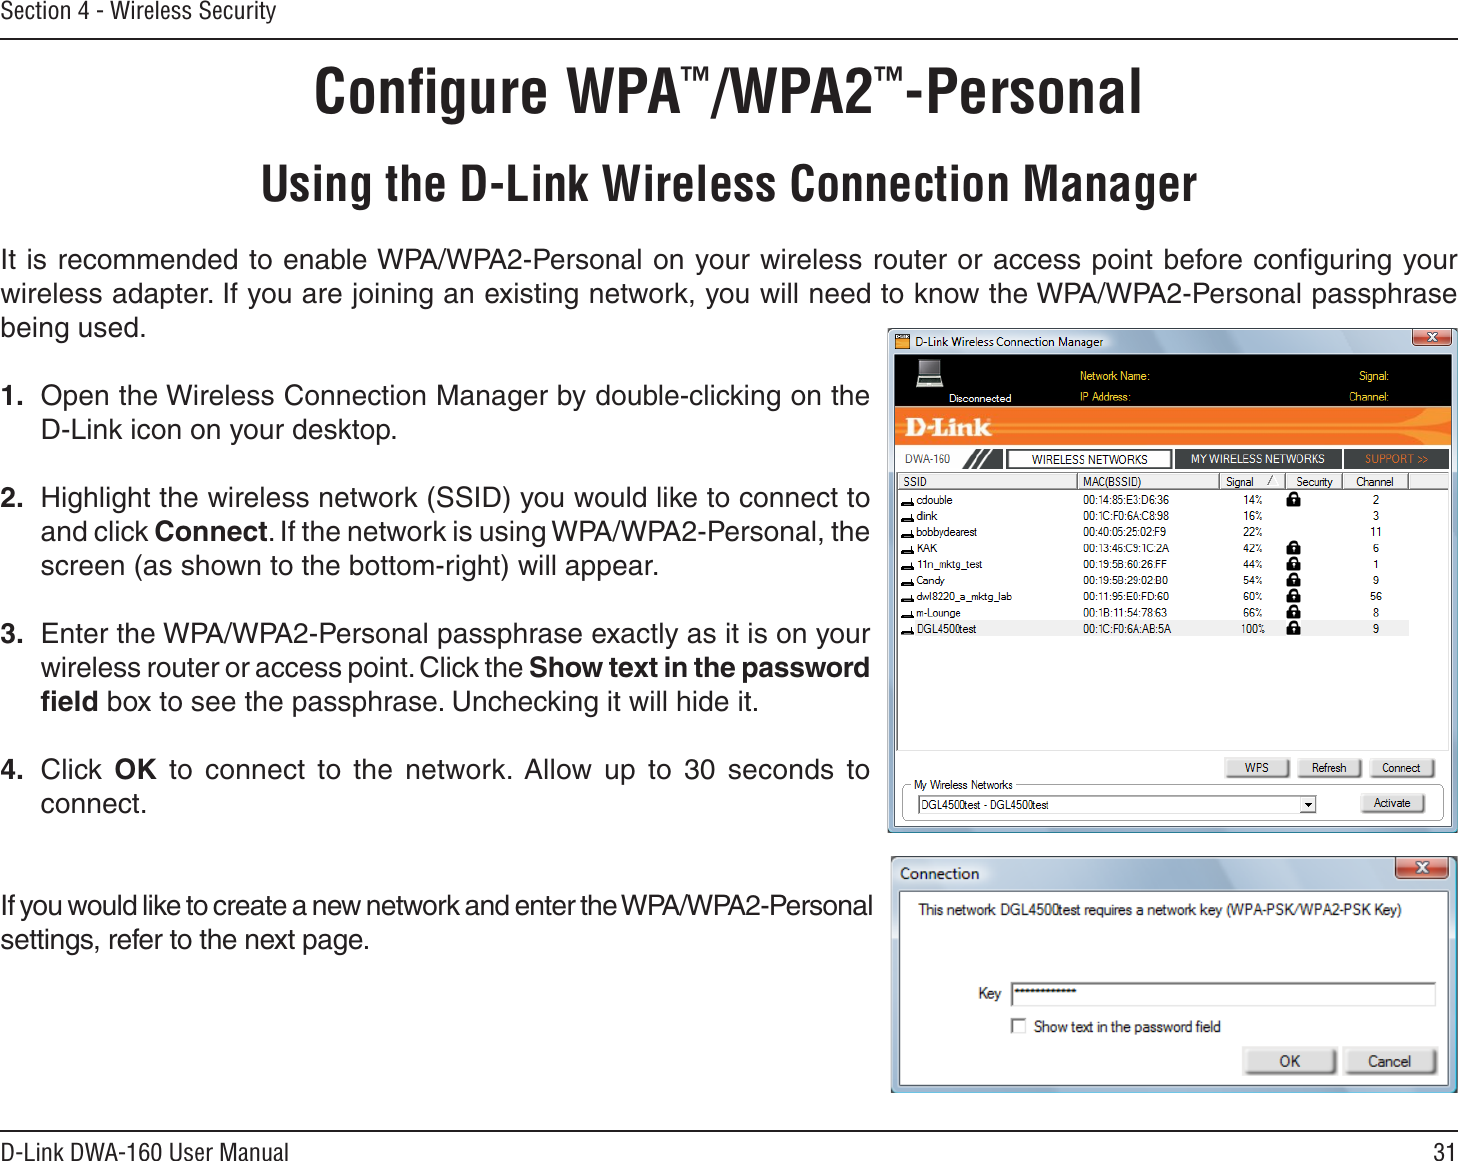 31D-Link DWA-160 User ManualSection 4 - Wireless SecurityConﬁgure WPA™/WPA2™-PersonalUsing the D-Link Wireless Connection ManagerIt is recommended to enable WPA/WPA2-Personal on your wireless router or access point before conﬁguring your wireless adapter. If you are joining an existing network, you will need to know the WPA/WPA2-Personal passphrase being used.1. Open the Wireless Connection Manager by double-clicking on the D-Link icon on your desktop. 2. Highlight the wireless network (SSID) you would like to connect to and click Connect. If the network is using WPA/WPA2-Personal, the screen (as shown to the bottom-right) will appear. 3. Enter the WPA/WPA2-Personal passphrase exactly as it is on your wireless router or access point. Click the Show text in the password ﬁeld box to see the passphrase. Unchecking it will hide it.4. Click  OK to connect to the network. Allow up to 30 seconds to connect.If you would like to create a new network and enter the WPA/WPA2-Personal settings, refer to the next page.